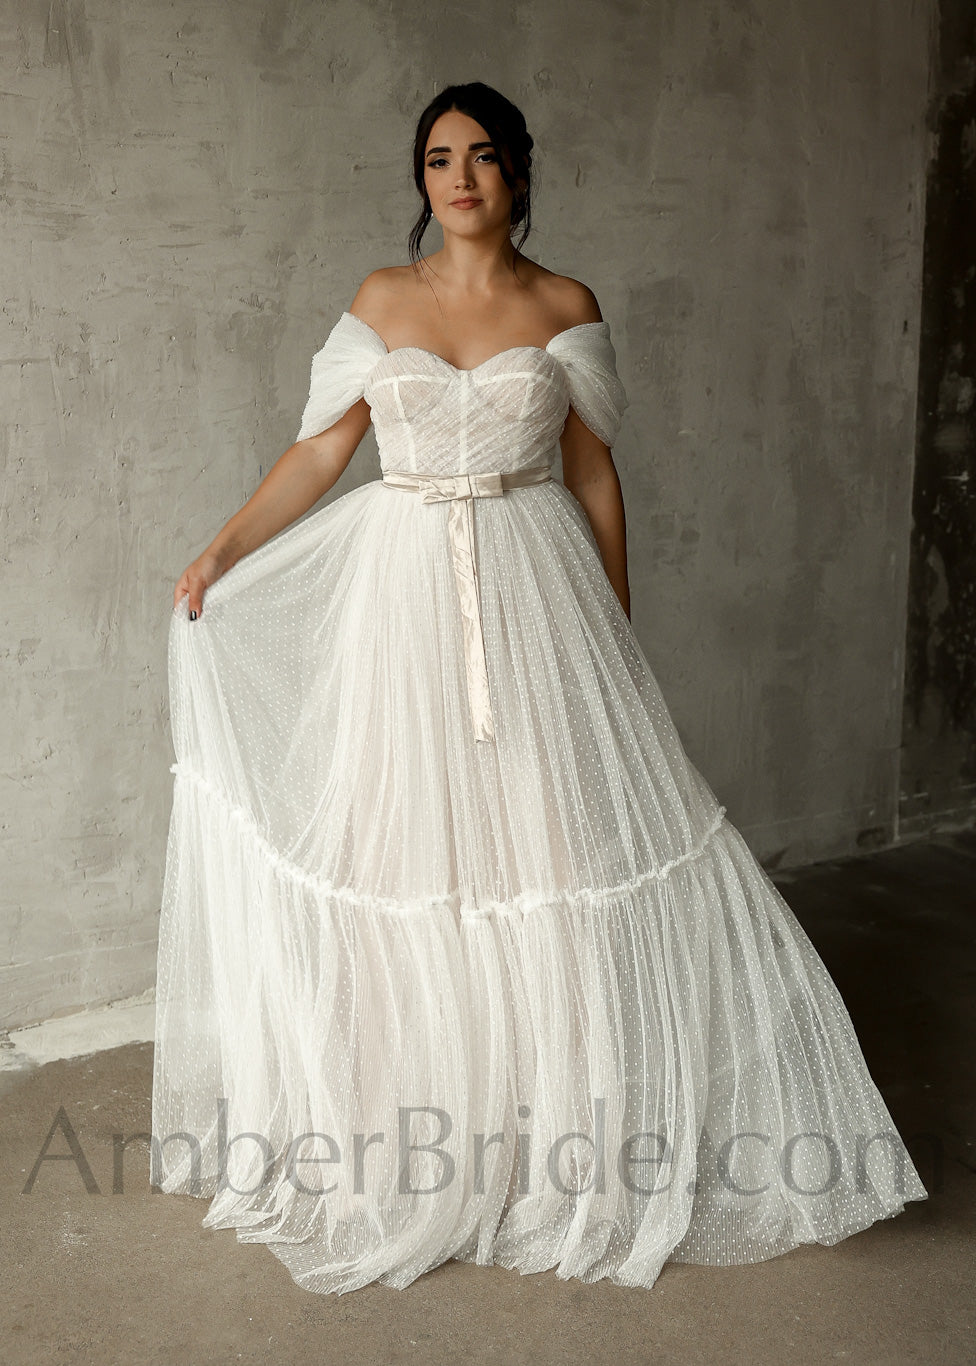 Rustic Ball Gown Country Style Off The Shoulder Tulle Wedding Dress - AmberBride